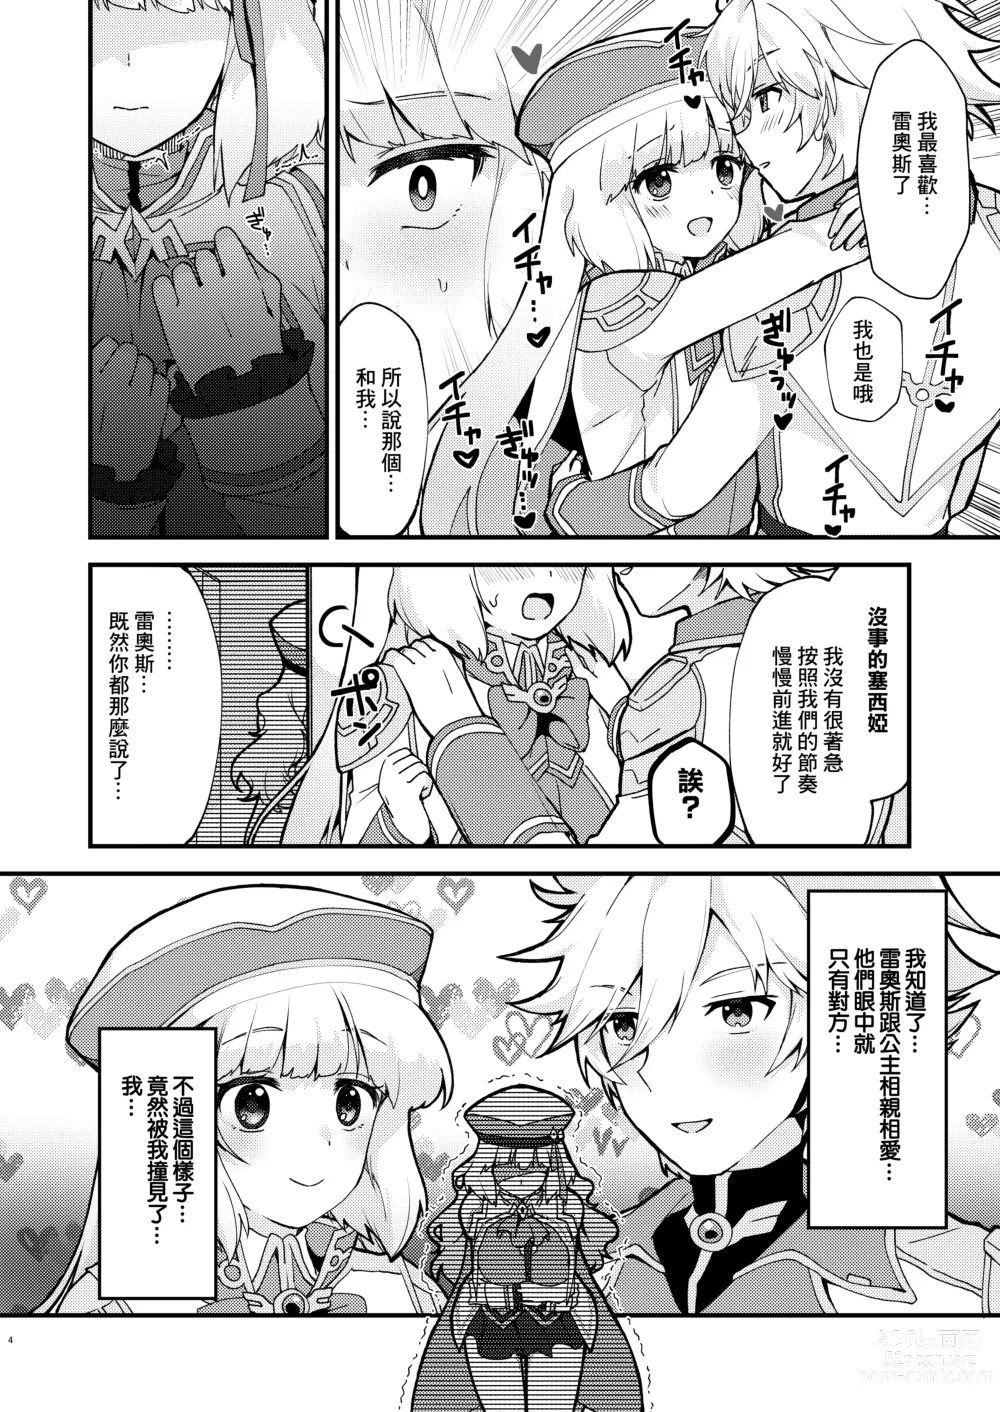 Page 4 of doujinshi 諾諾強襲